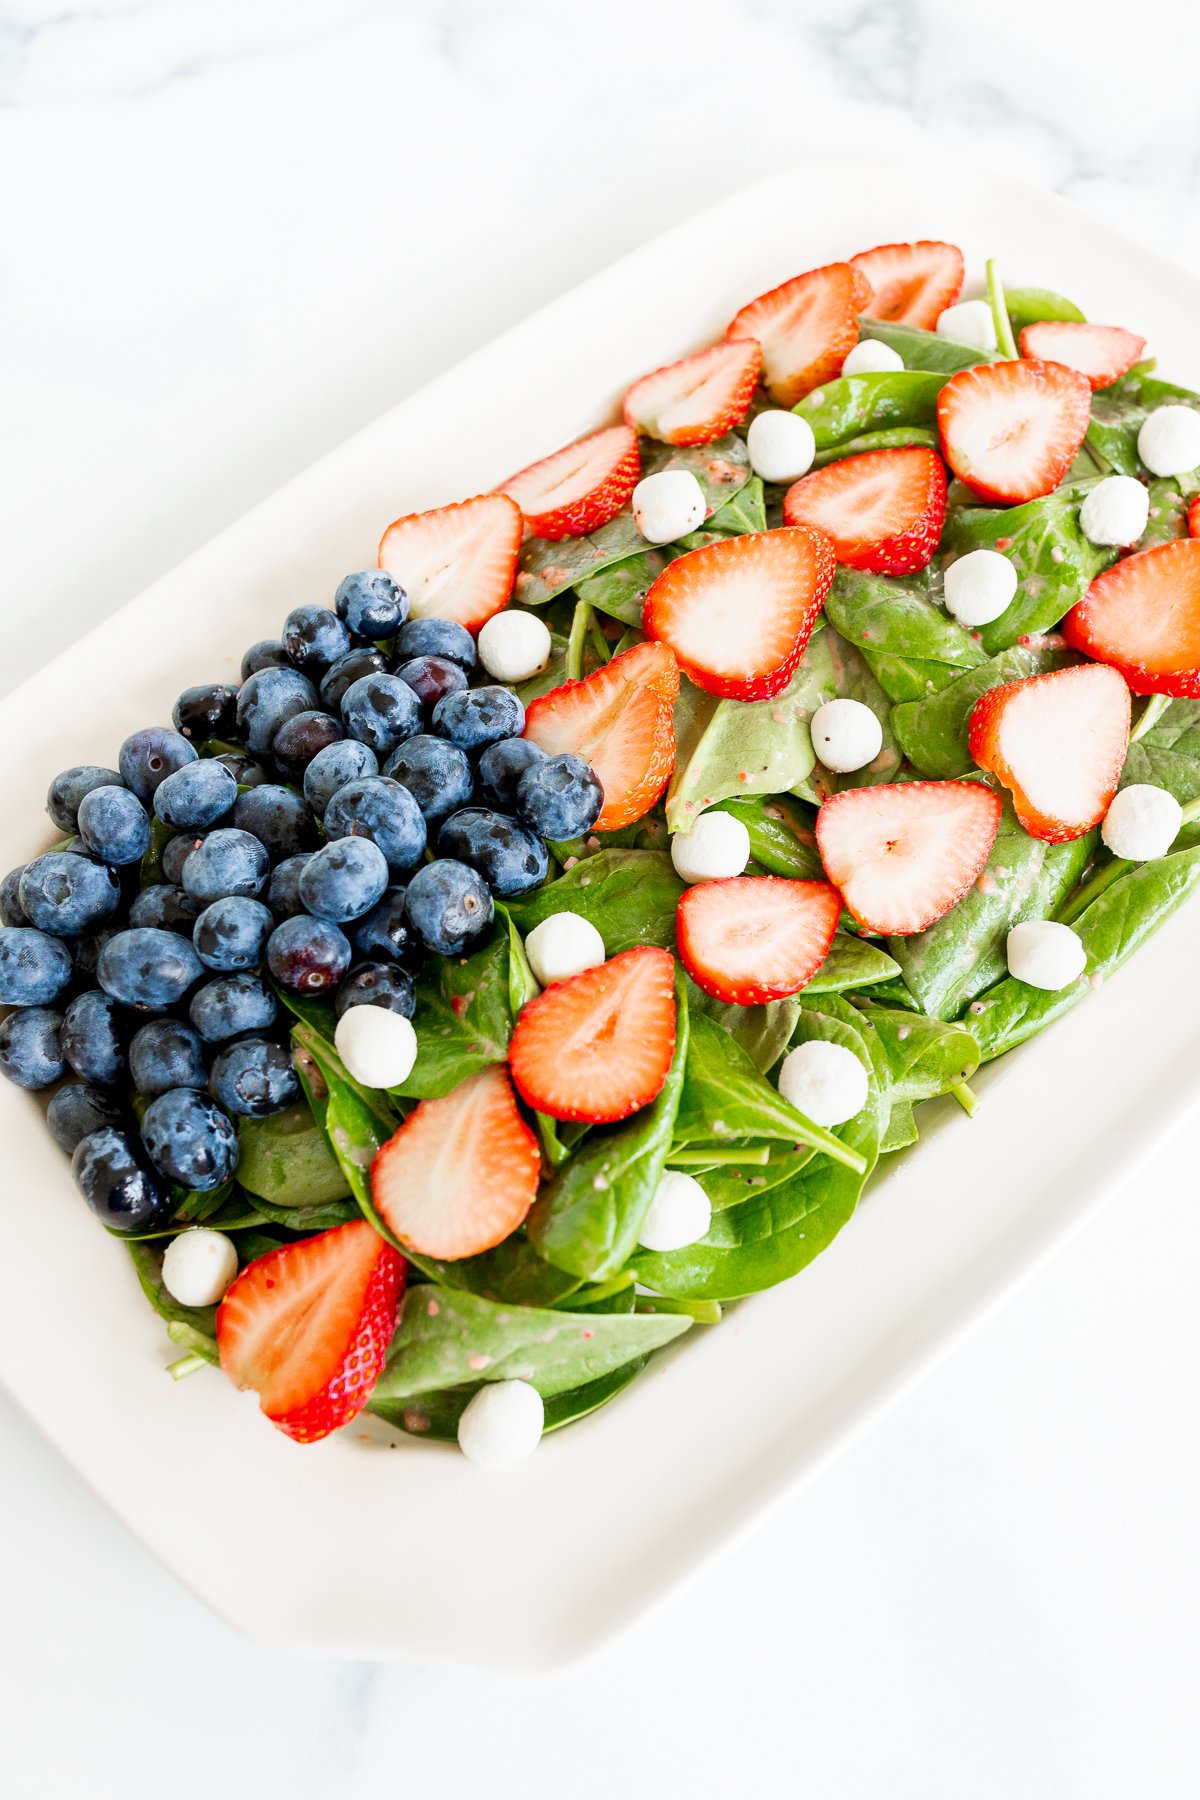 A vibrant red, white, and blue salad with fresh spinach, sliced strawberries, whole blueberries, and white round candies, all arranged in a white rectangular dish on a marble surface.